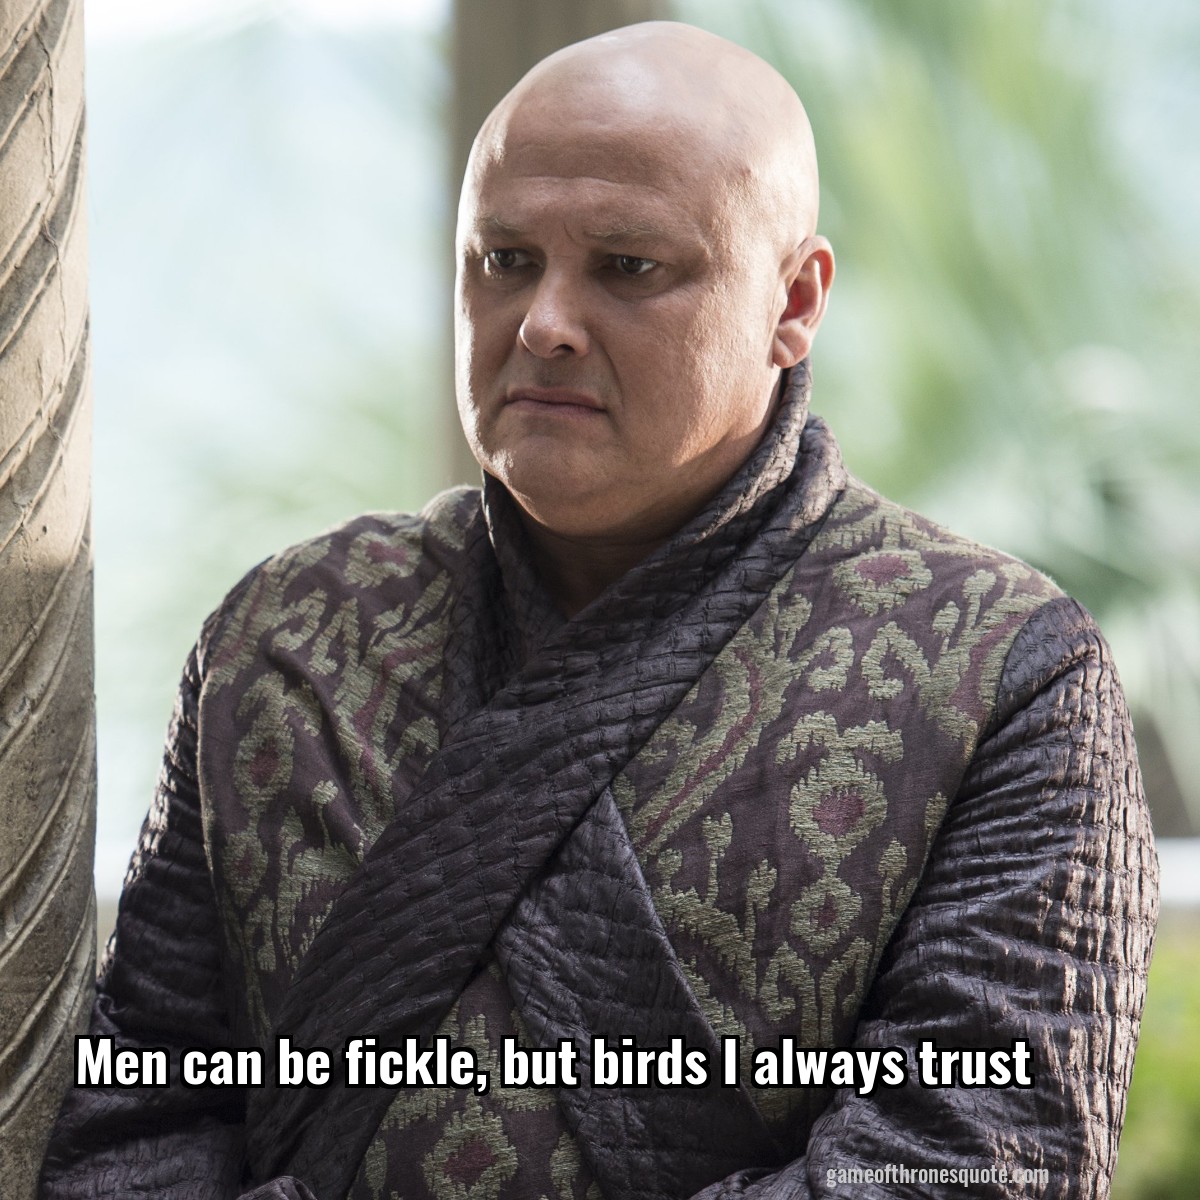 Men can be fickle, but birds I always trust